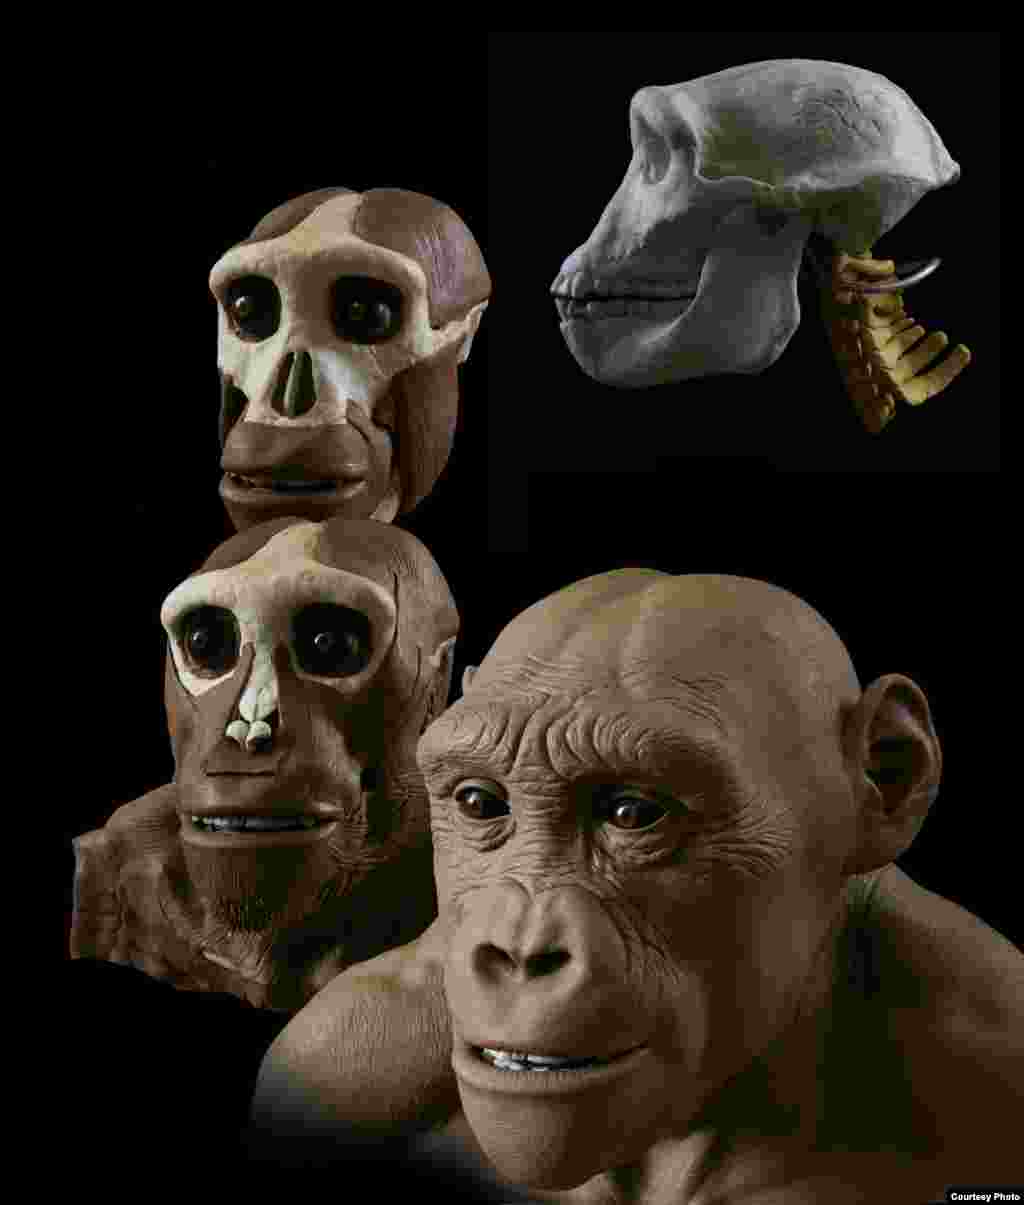 The artist takes cues from the fossilized skull and knowledge of human and ape anatomy to create forensically accurate models. (John Gurche, “Shaping Humanity”)